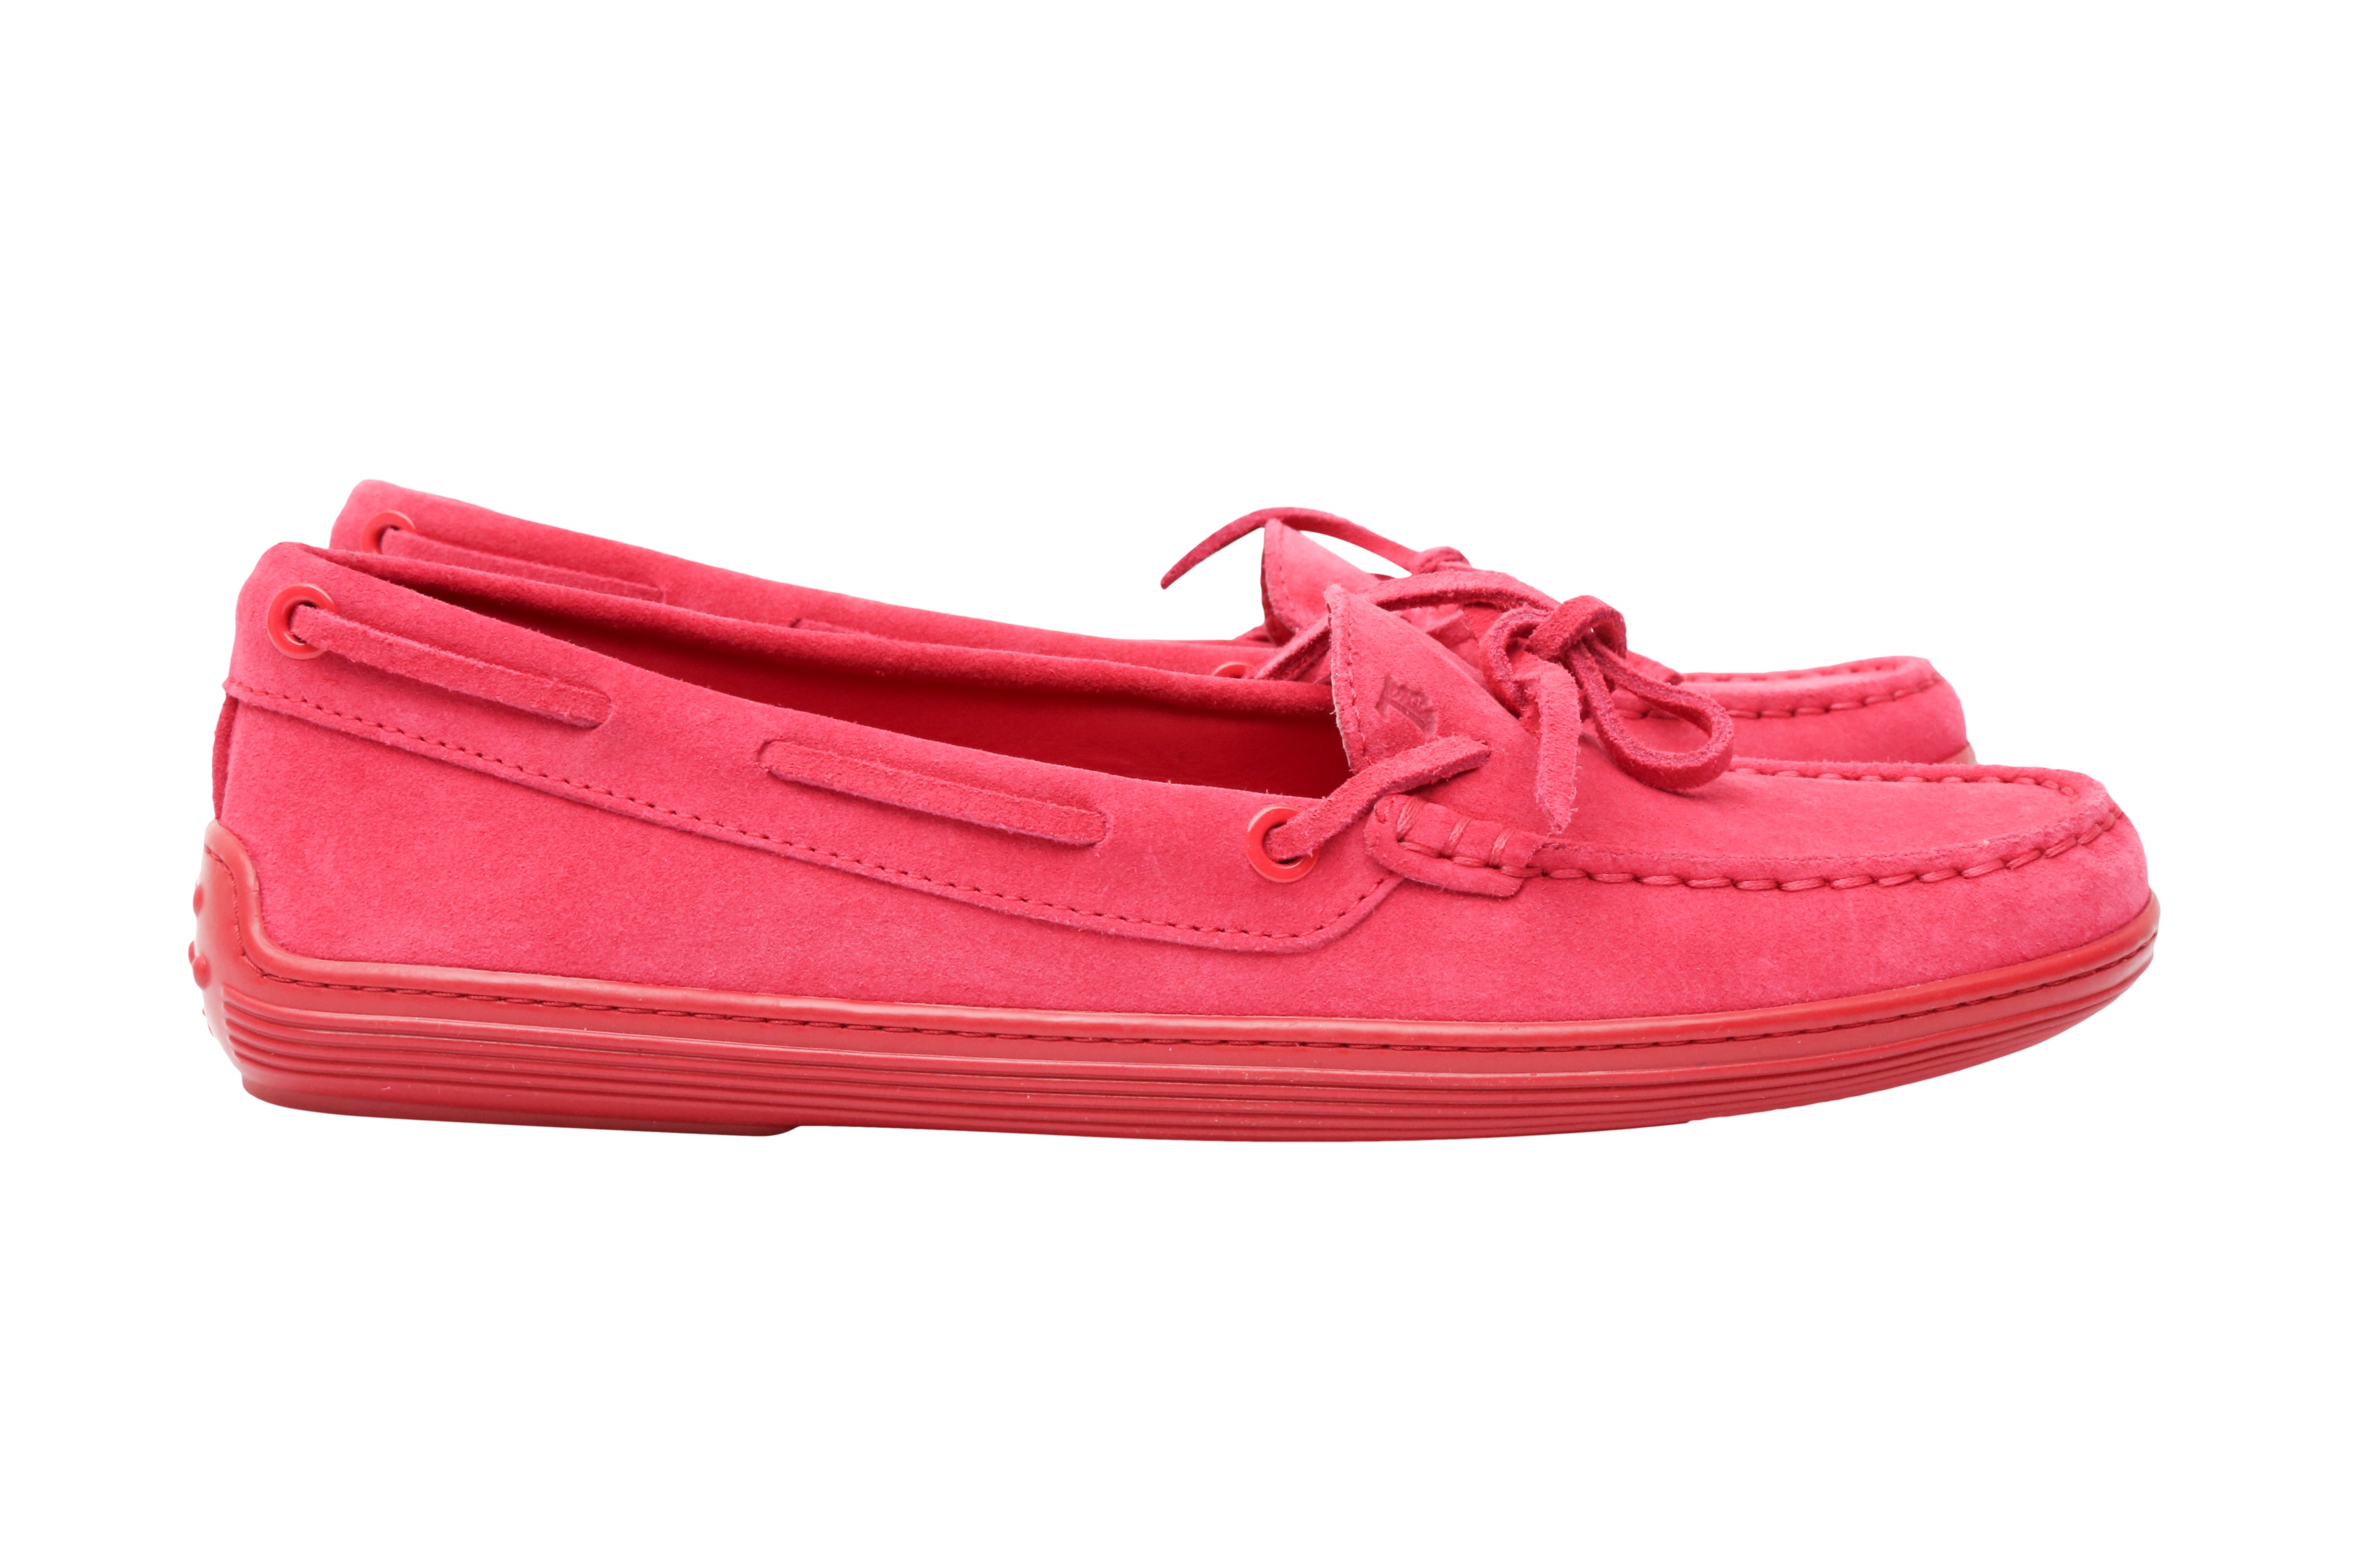 Tod's Fuschia Pink Driving Moccasin Loafer - Size 38